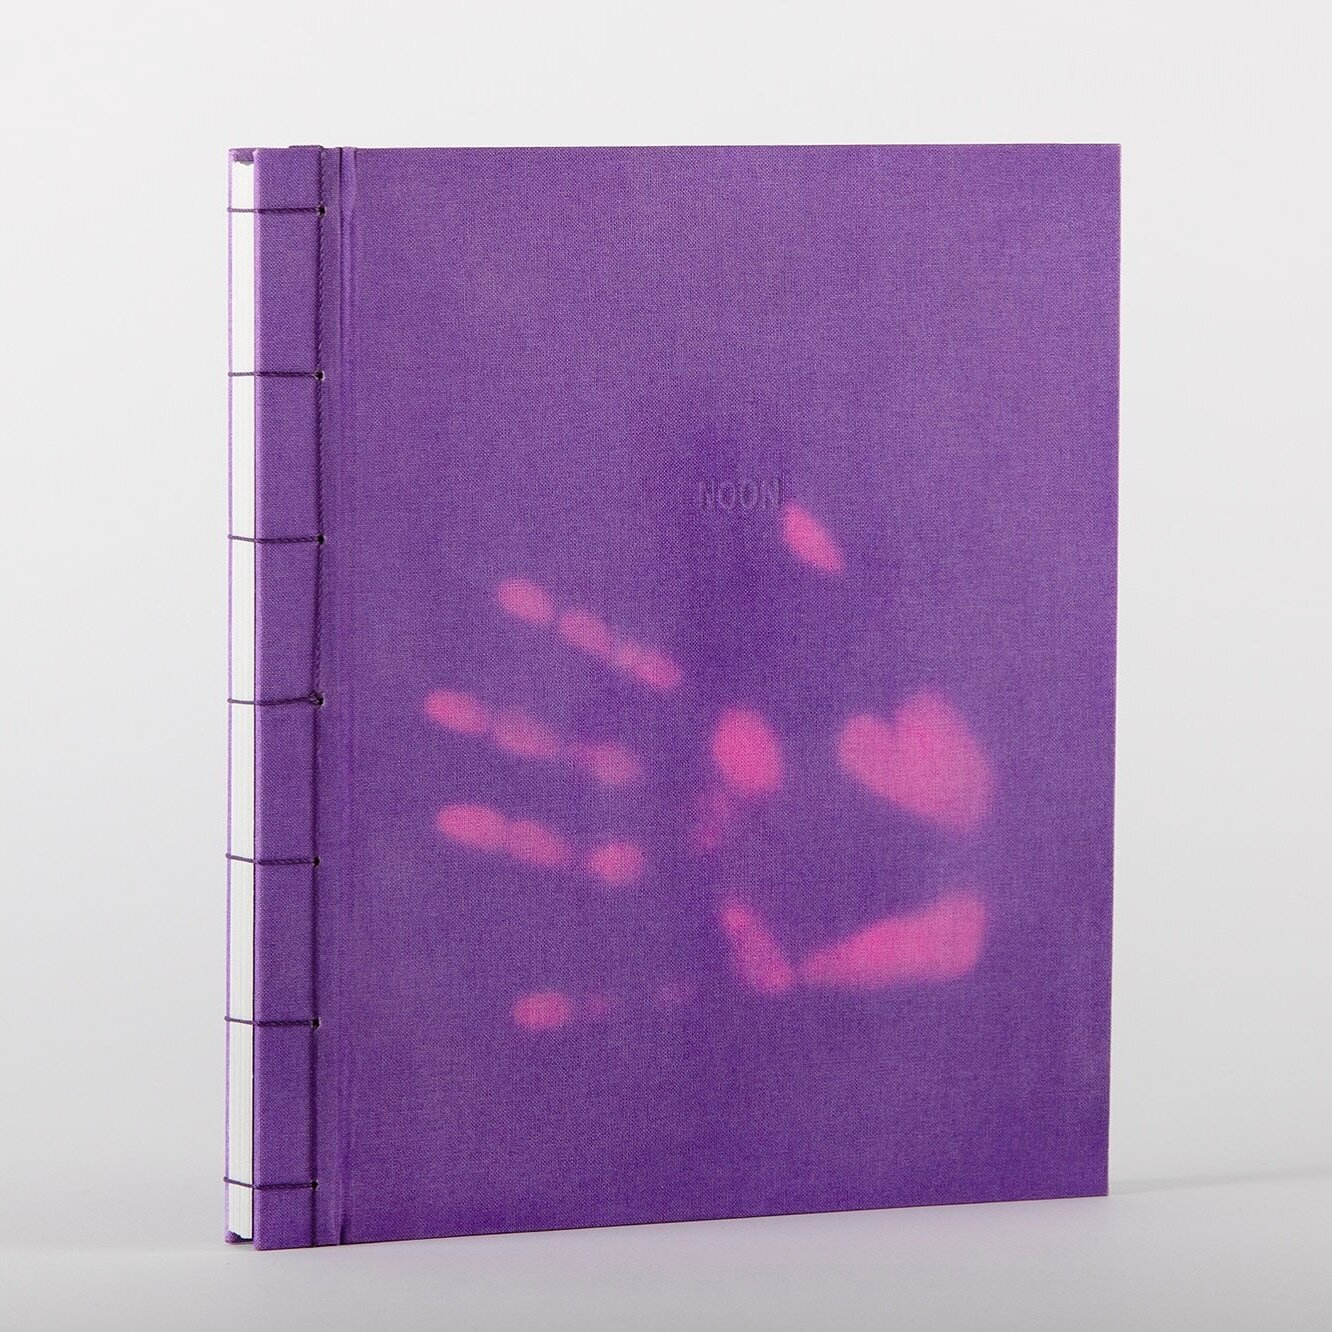 Noon by Laura Sperl

NOON is a visual and haptic experience of the passage of time and an invitation to be part of continuous change. The book consists of seven series of a mixture of photograms and chemigrams which resulted from experimentation with